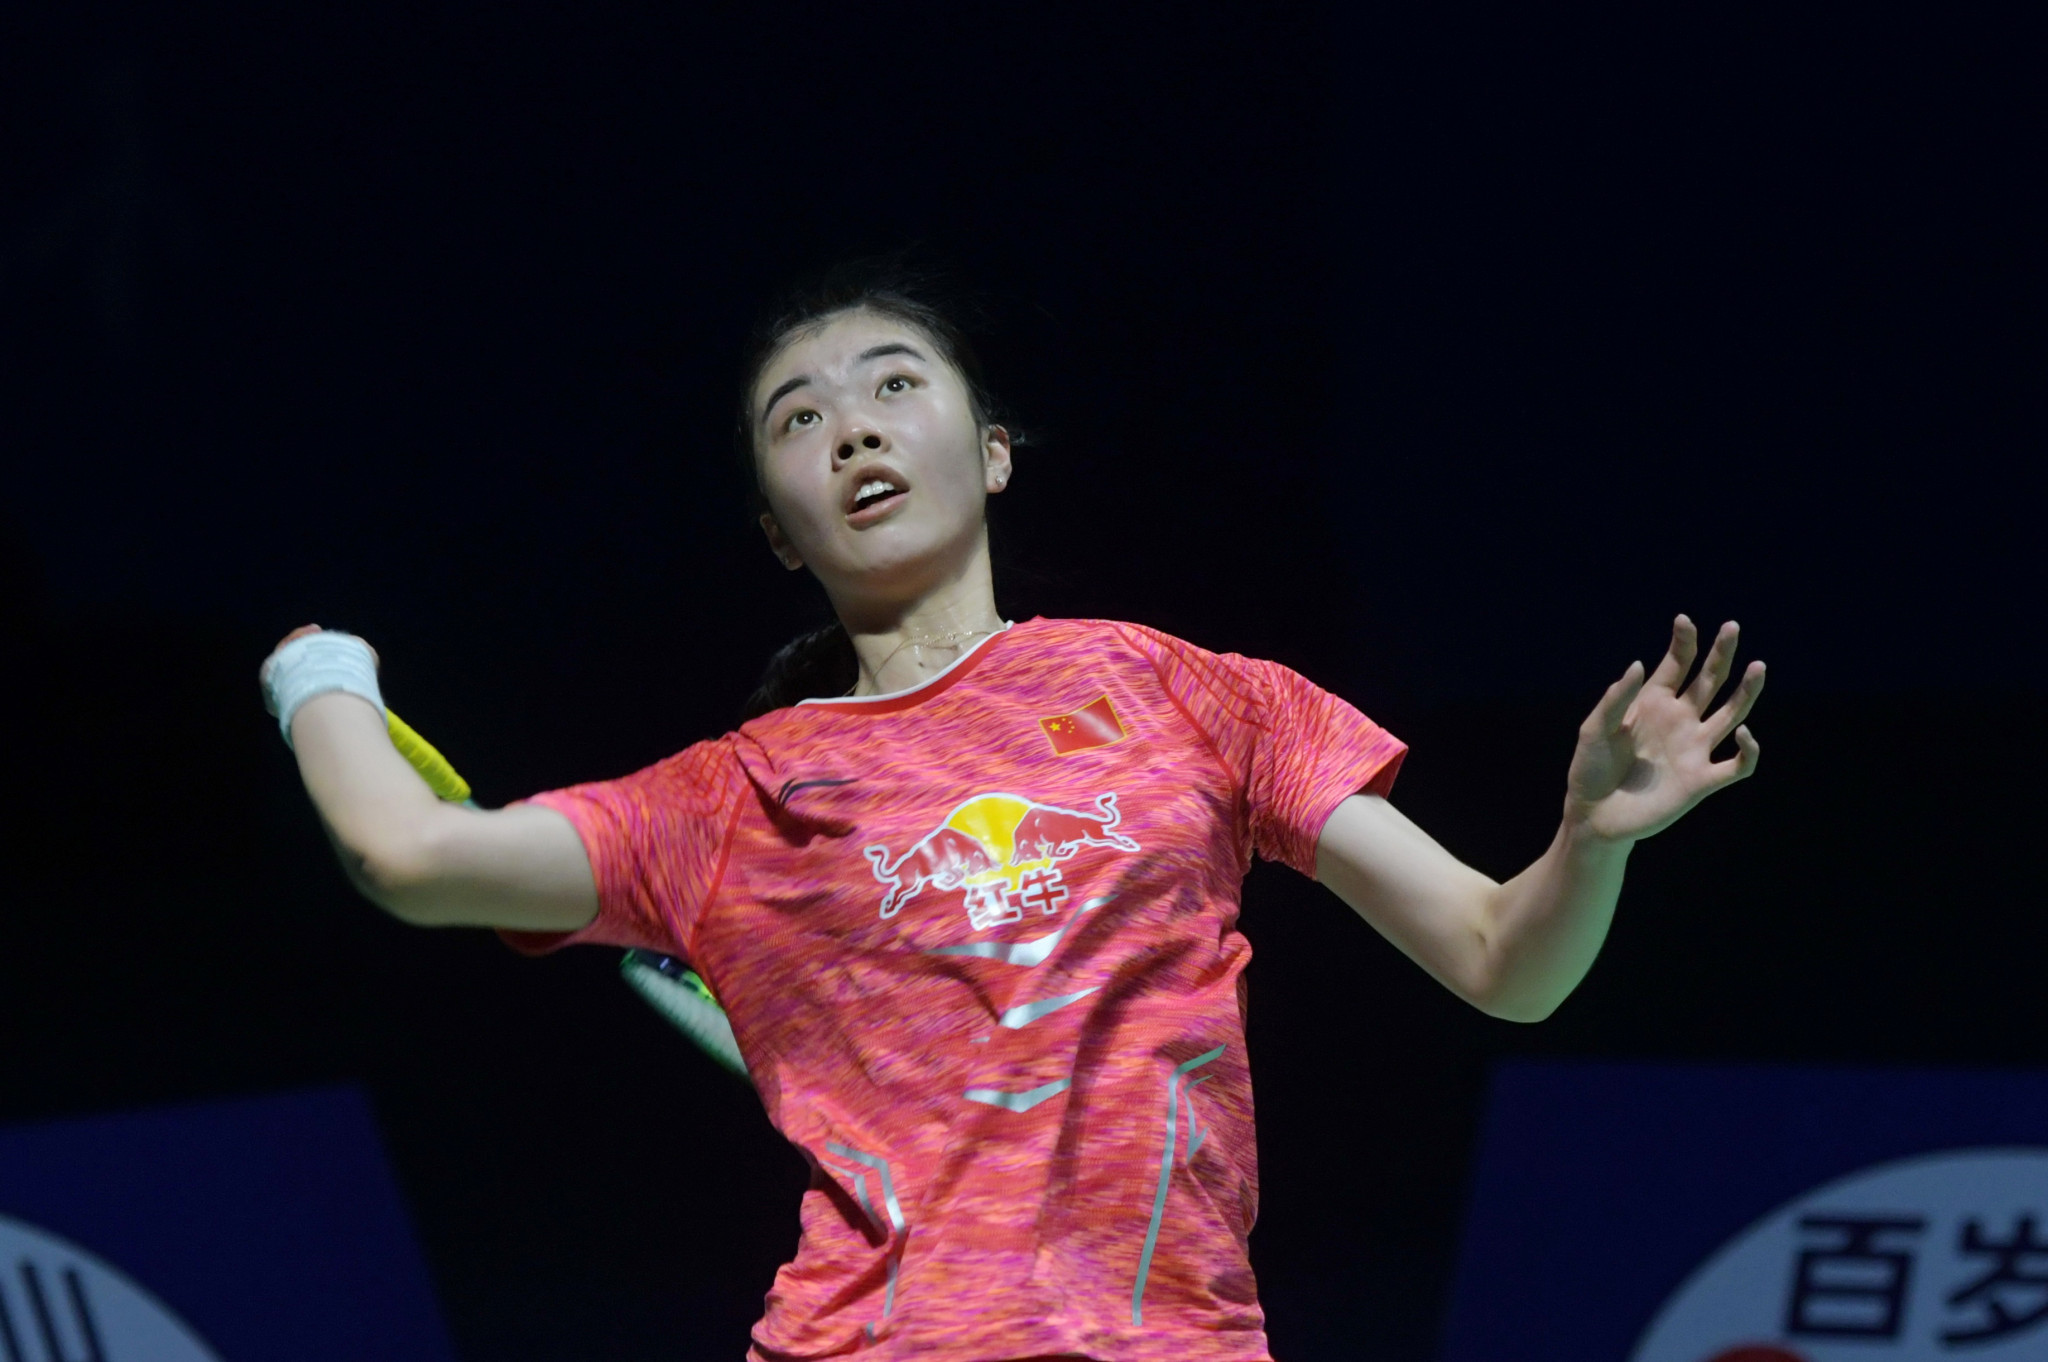 China's Gao Fangjie caused an upset in the women's singles tournament ©Getty Images